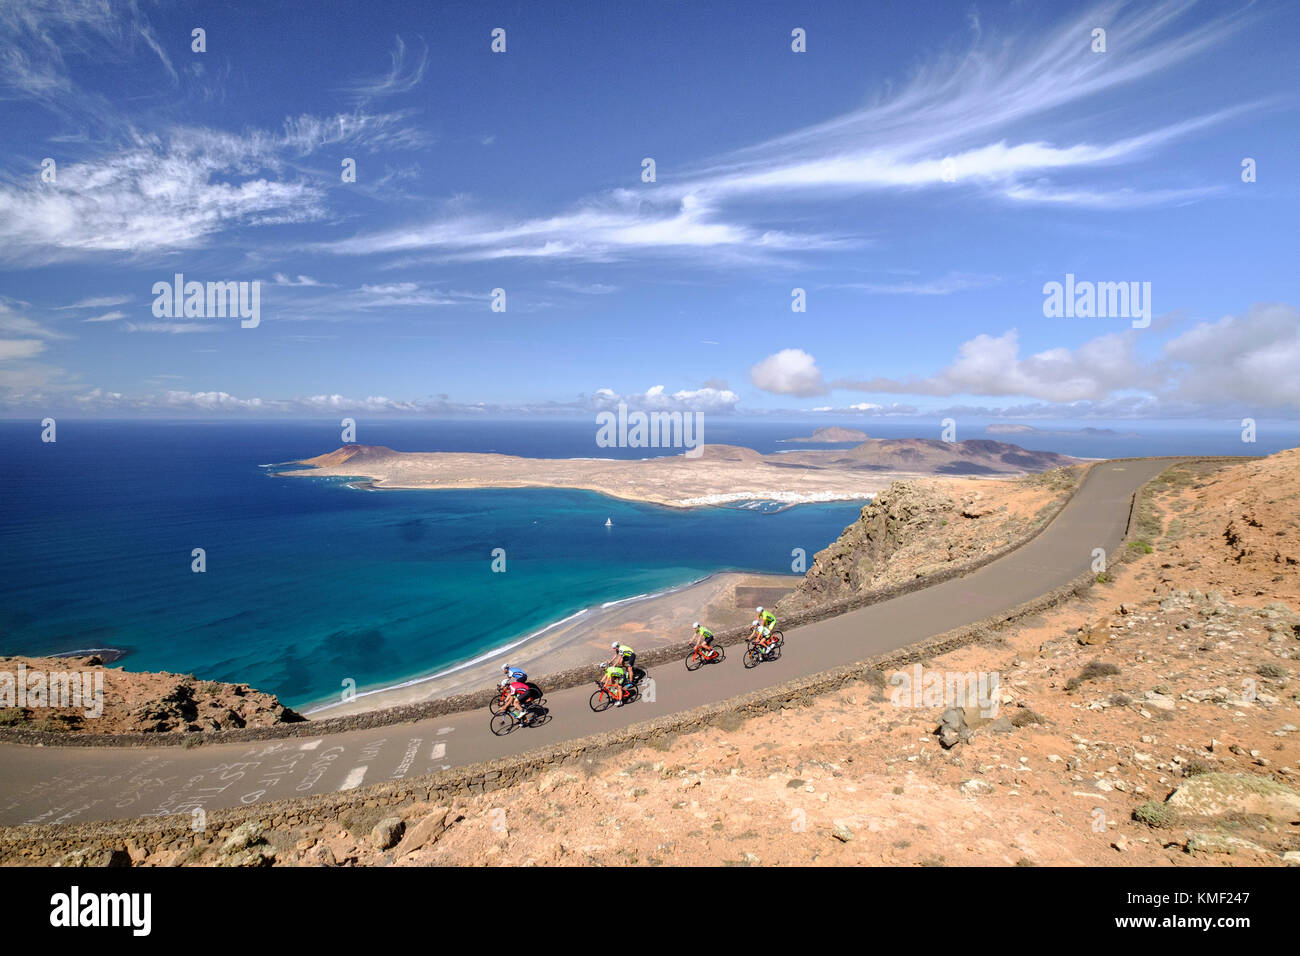 Group of cyclists pedaling on coastal road,Lanzarote,Canary Islands,Spain Stock Photo